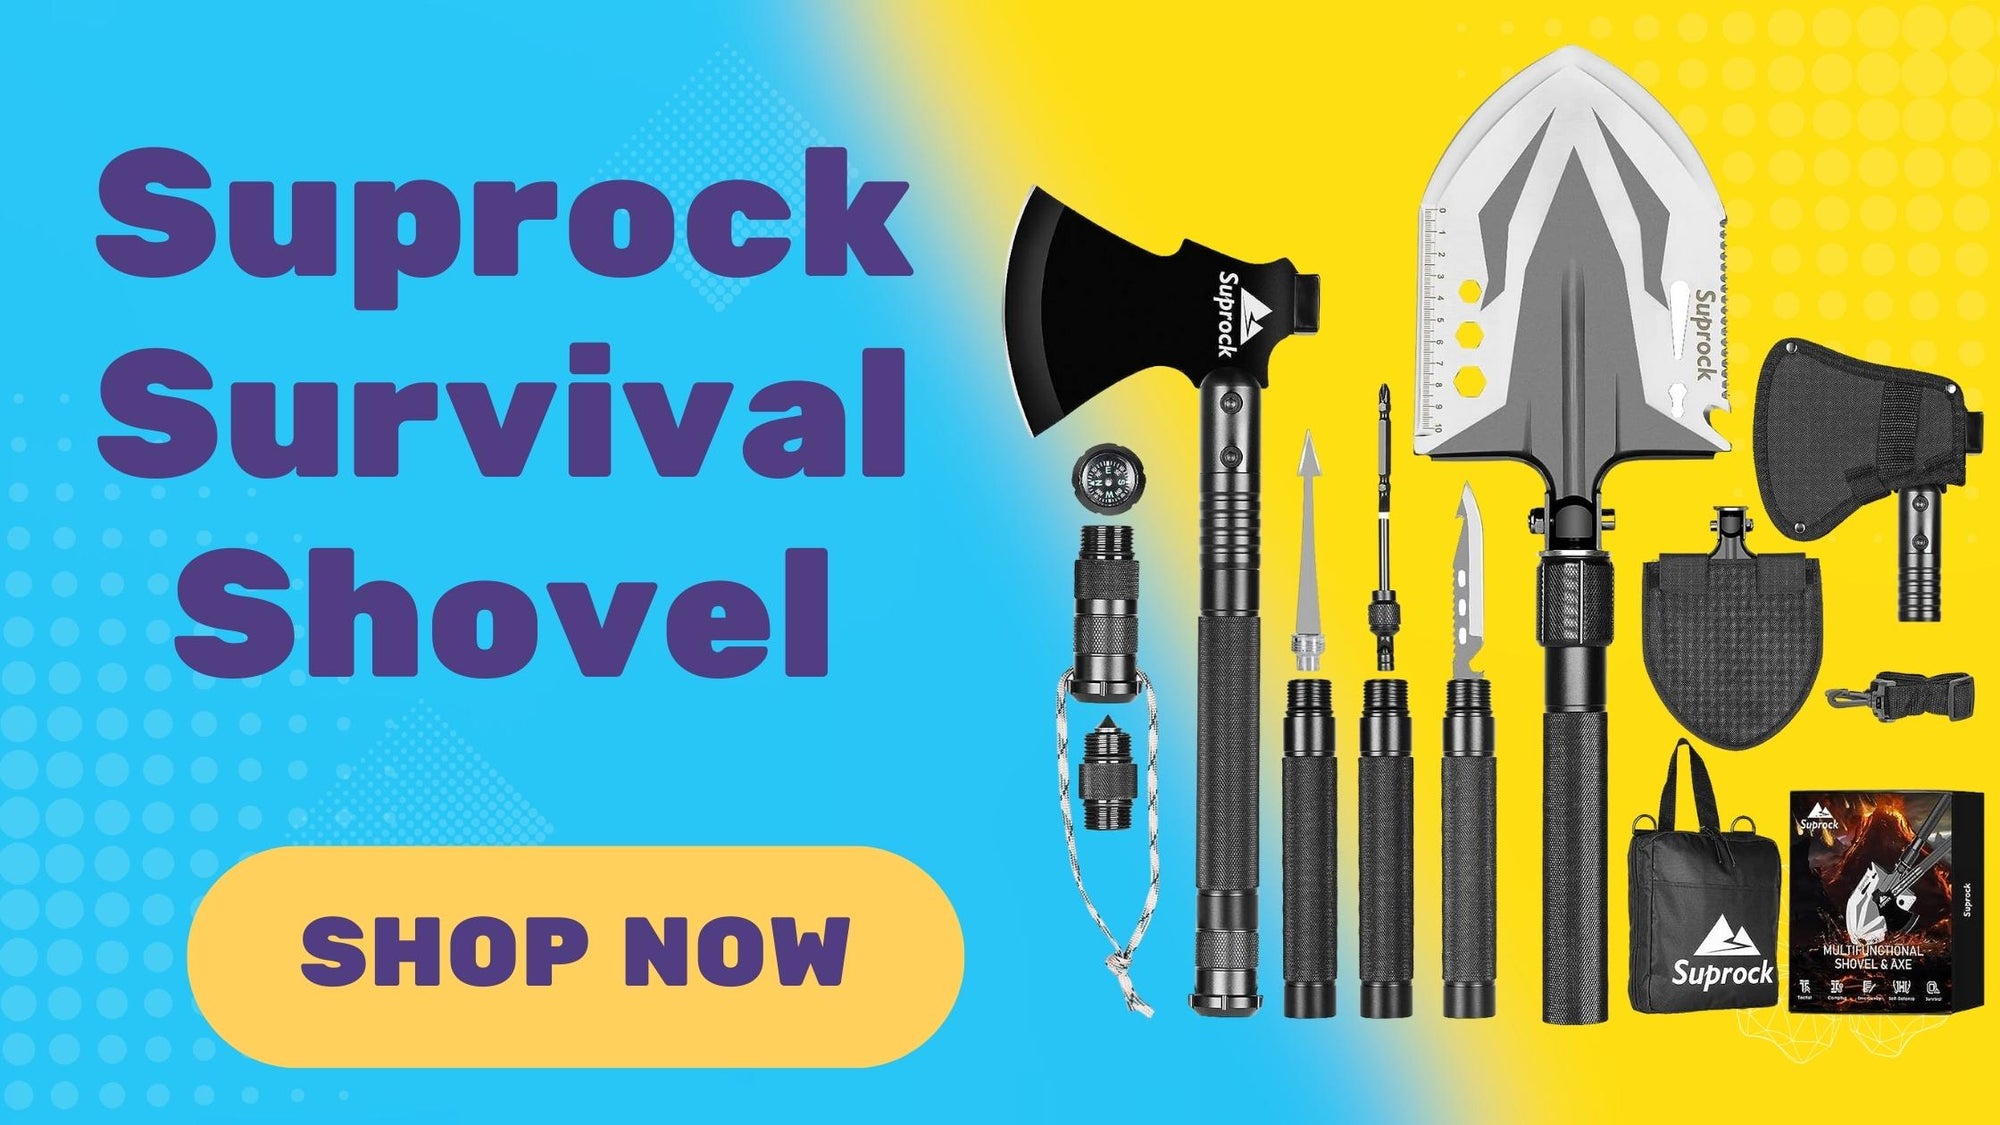 Be Prepared for Any Situation with the Suprock Survival Shovel